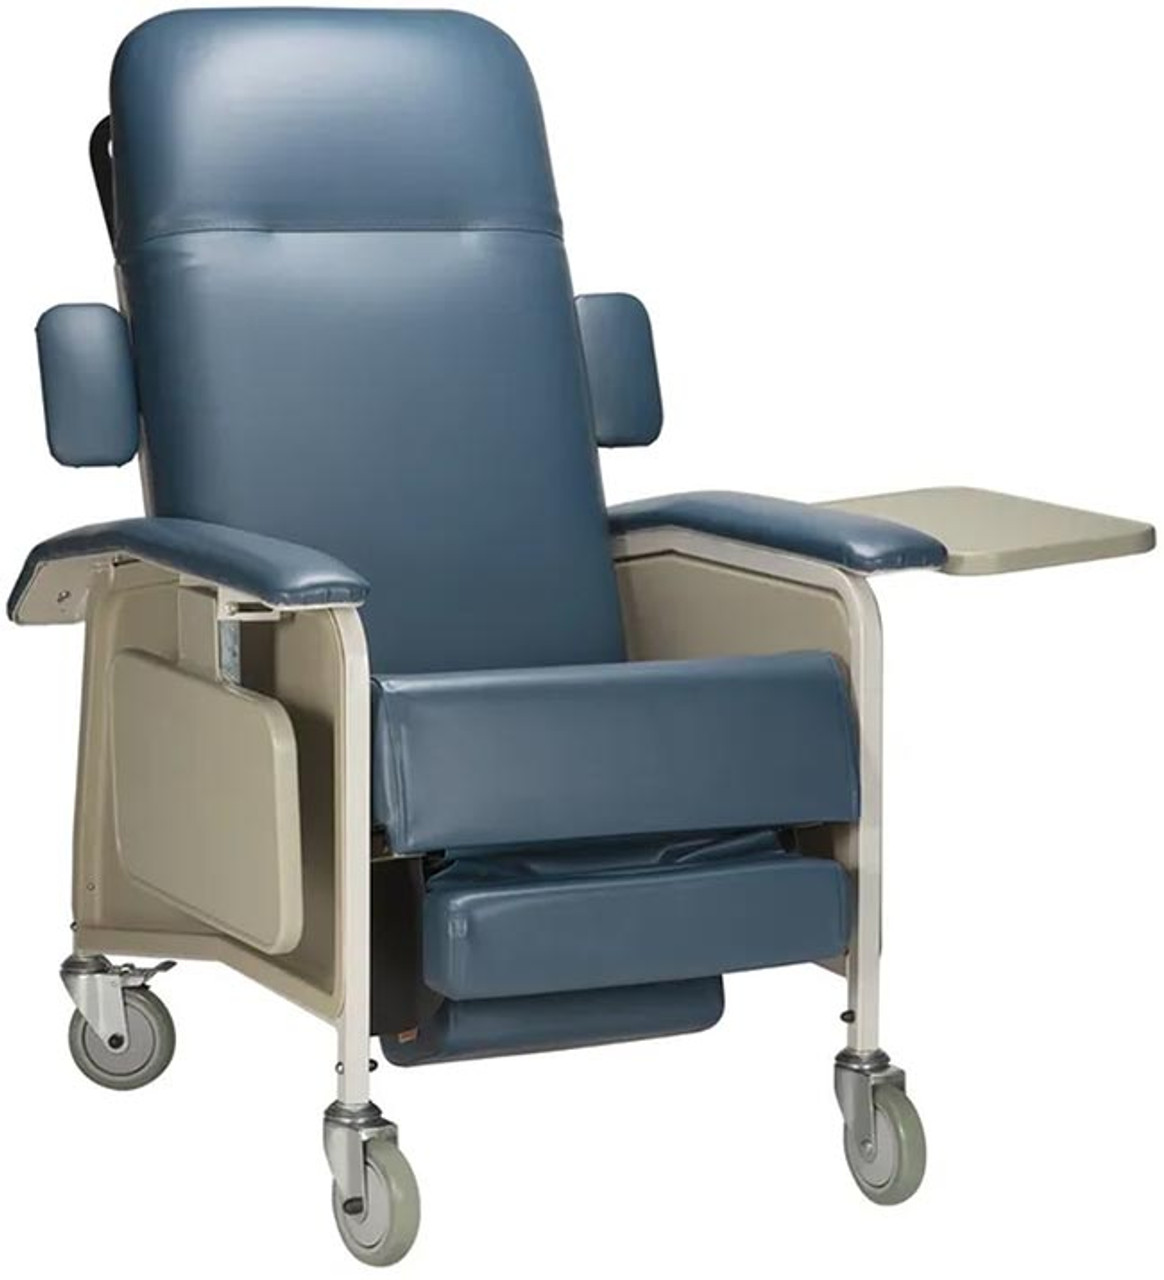 https://cdn11.bigcommerce.com/s-fxzehl/images/stencil/1280x1280/products/92490/86484/10522-clinical-recliner-br__97995.1673540786.jpg?c=2